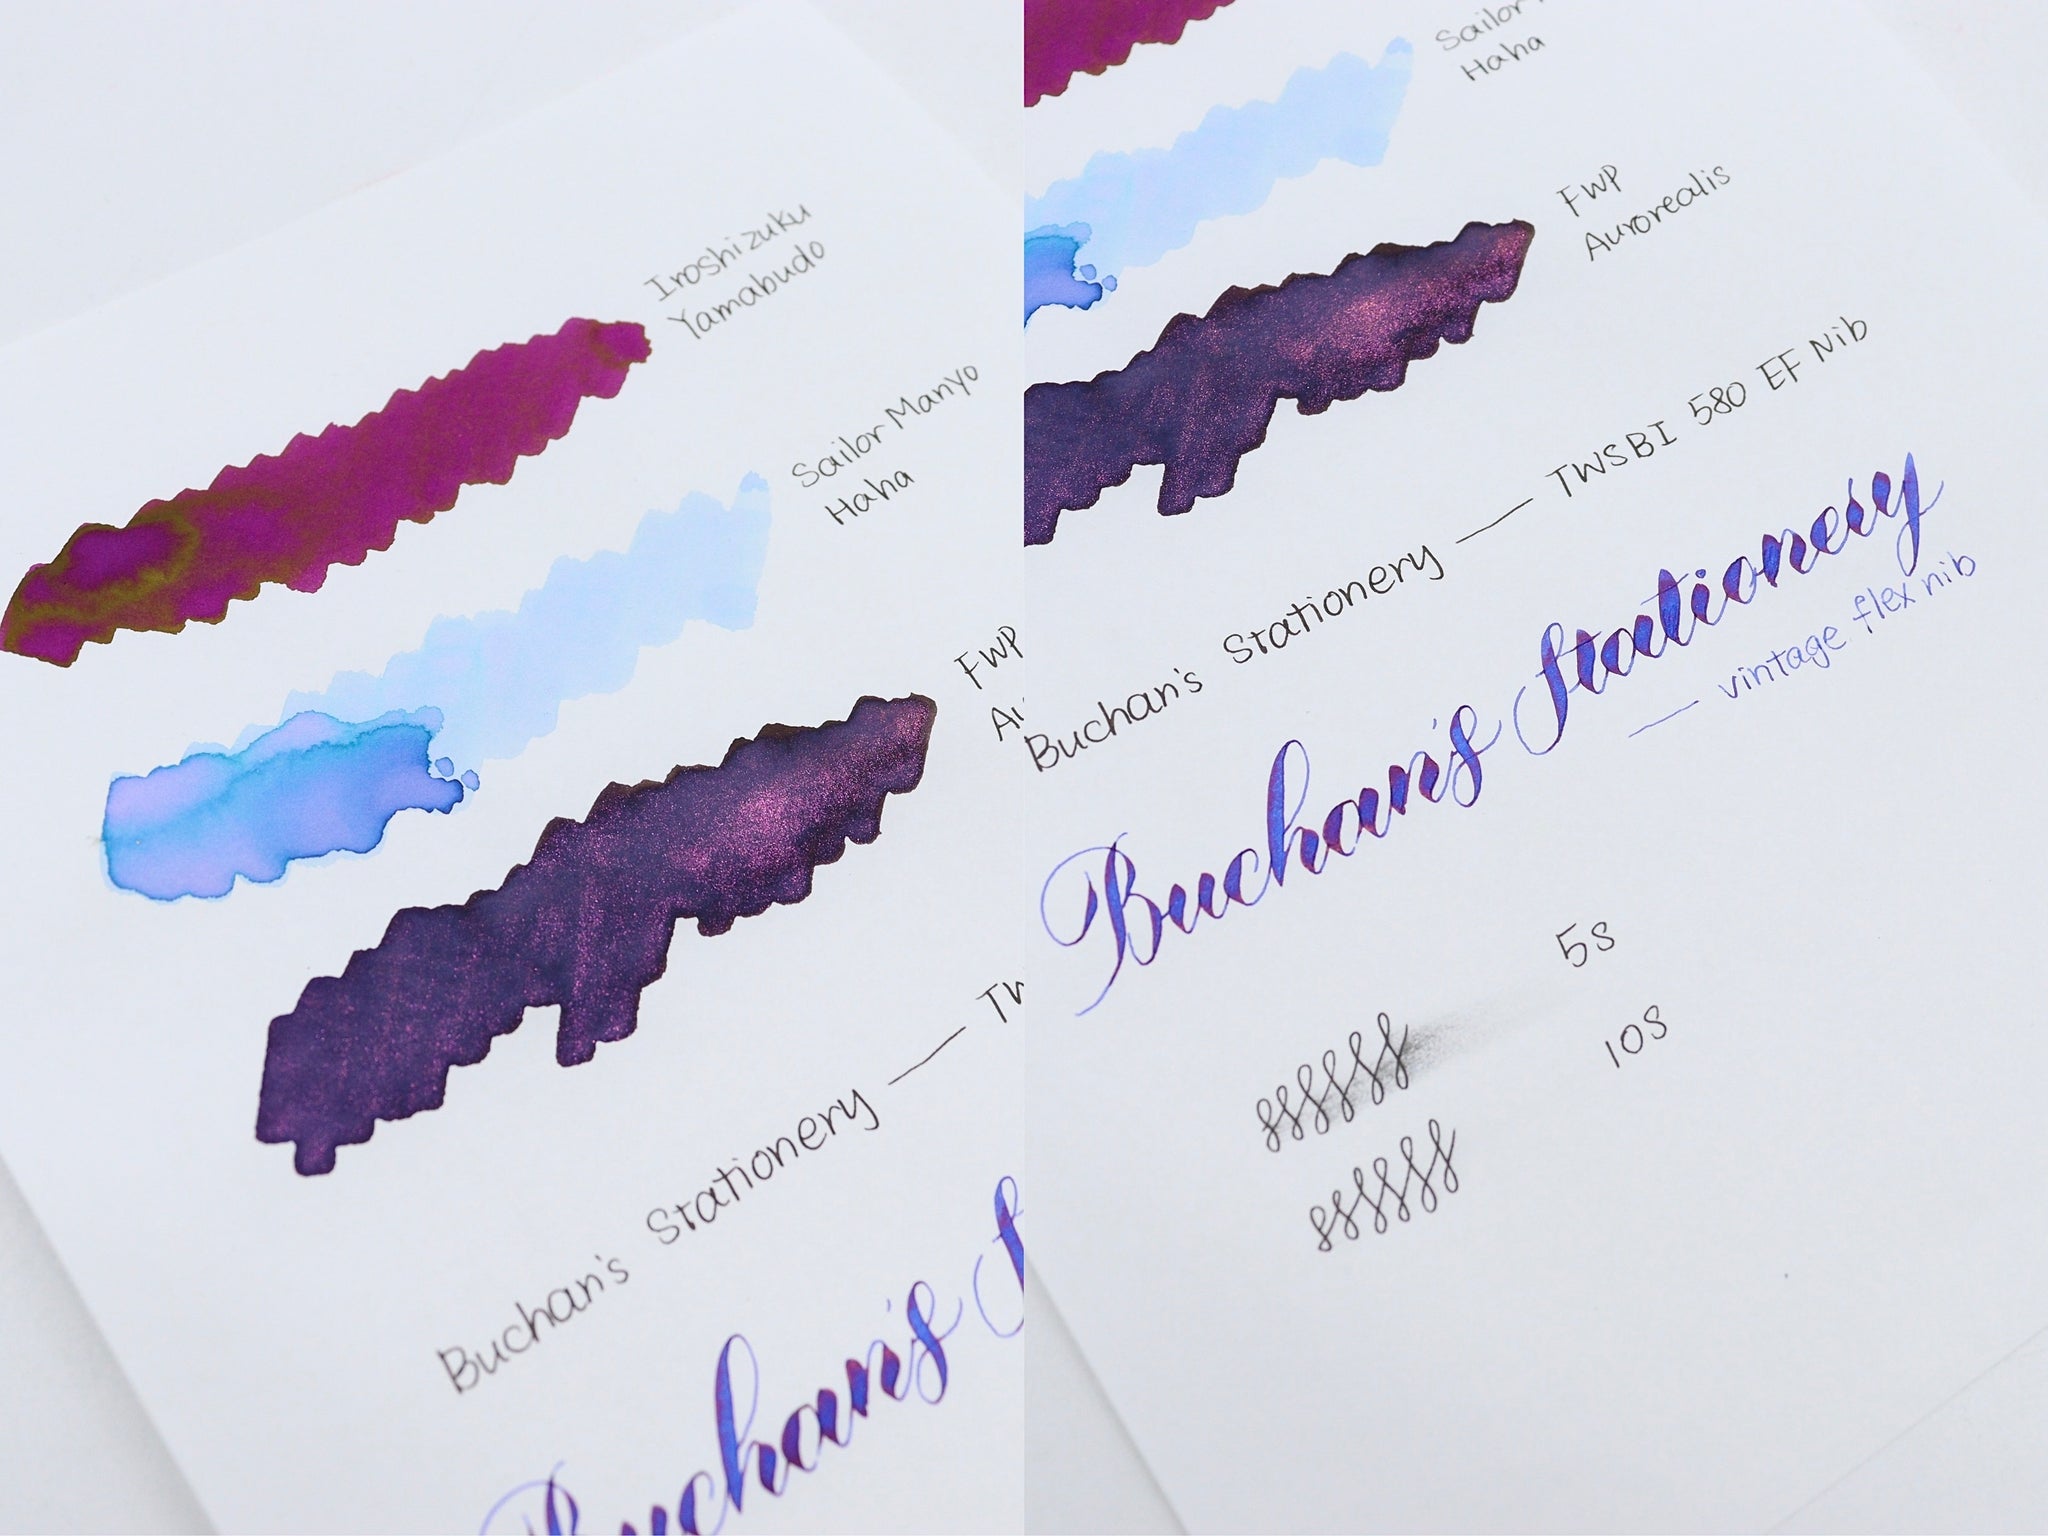 Sanzen 52gsm Tomoe River Paper Review Ink Swatches Test